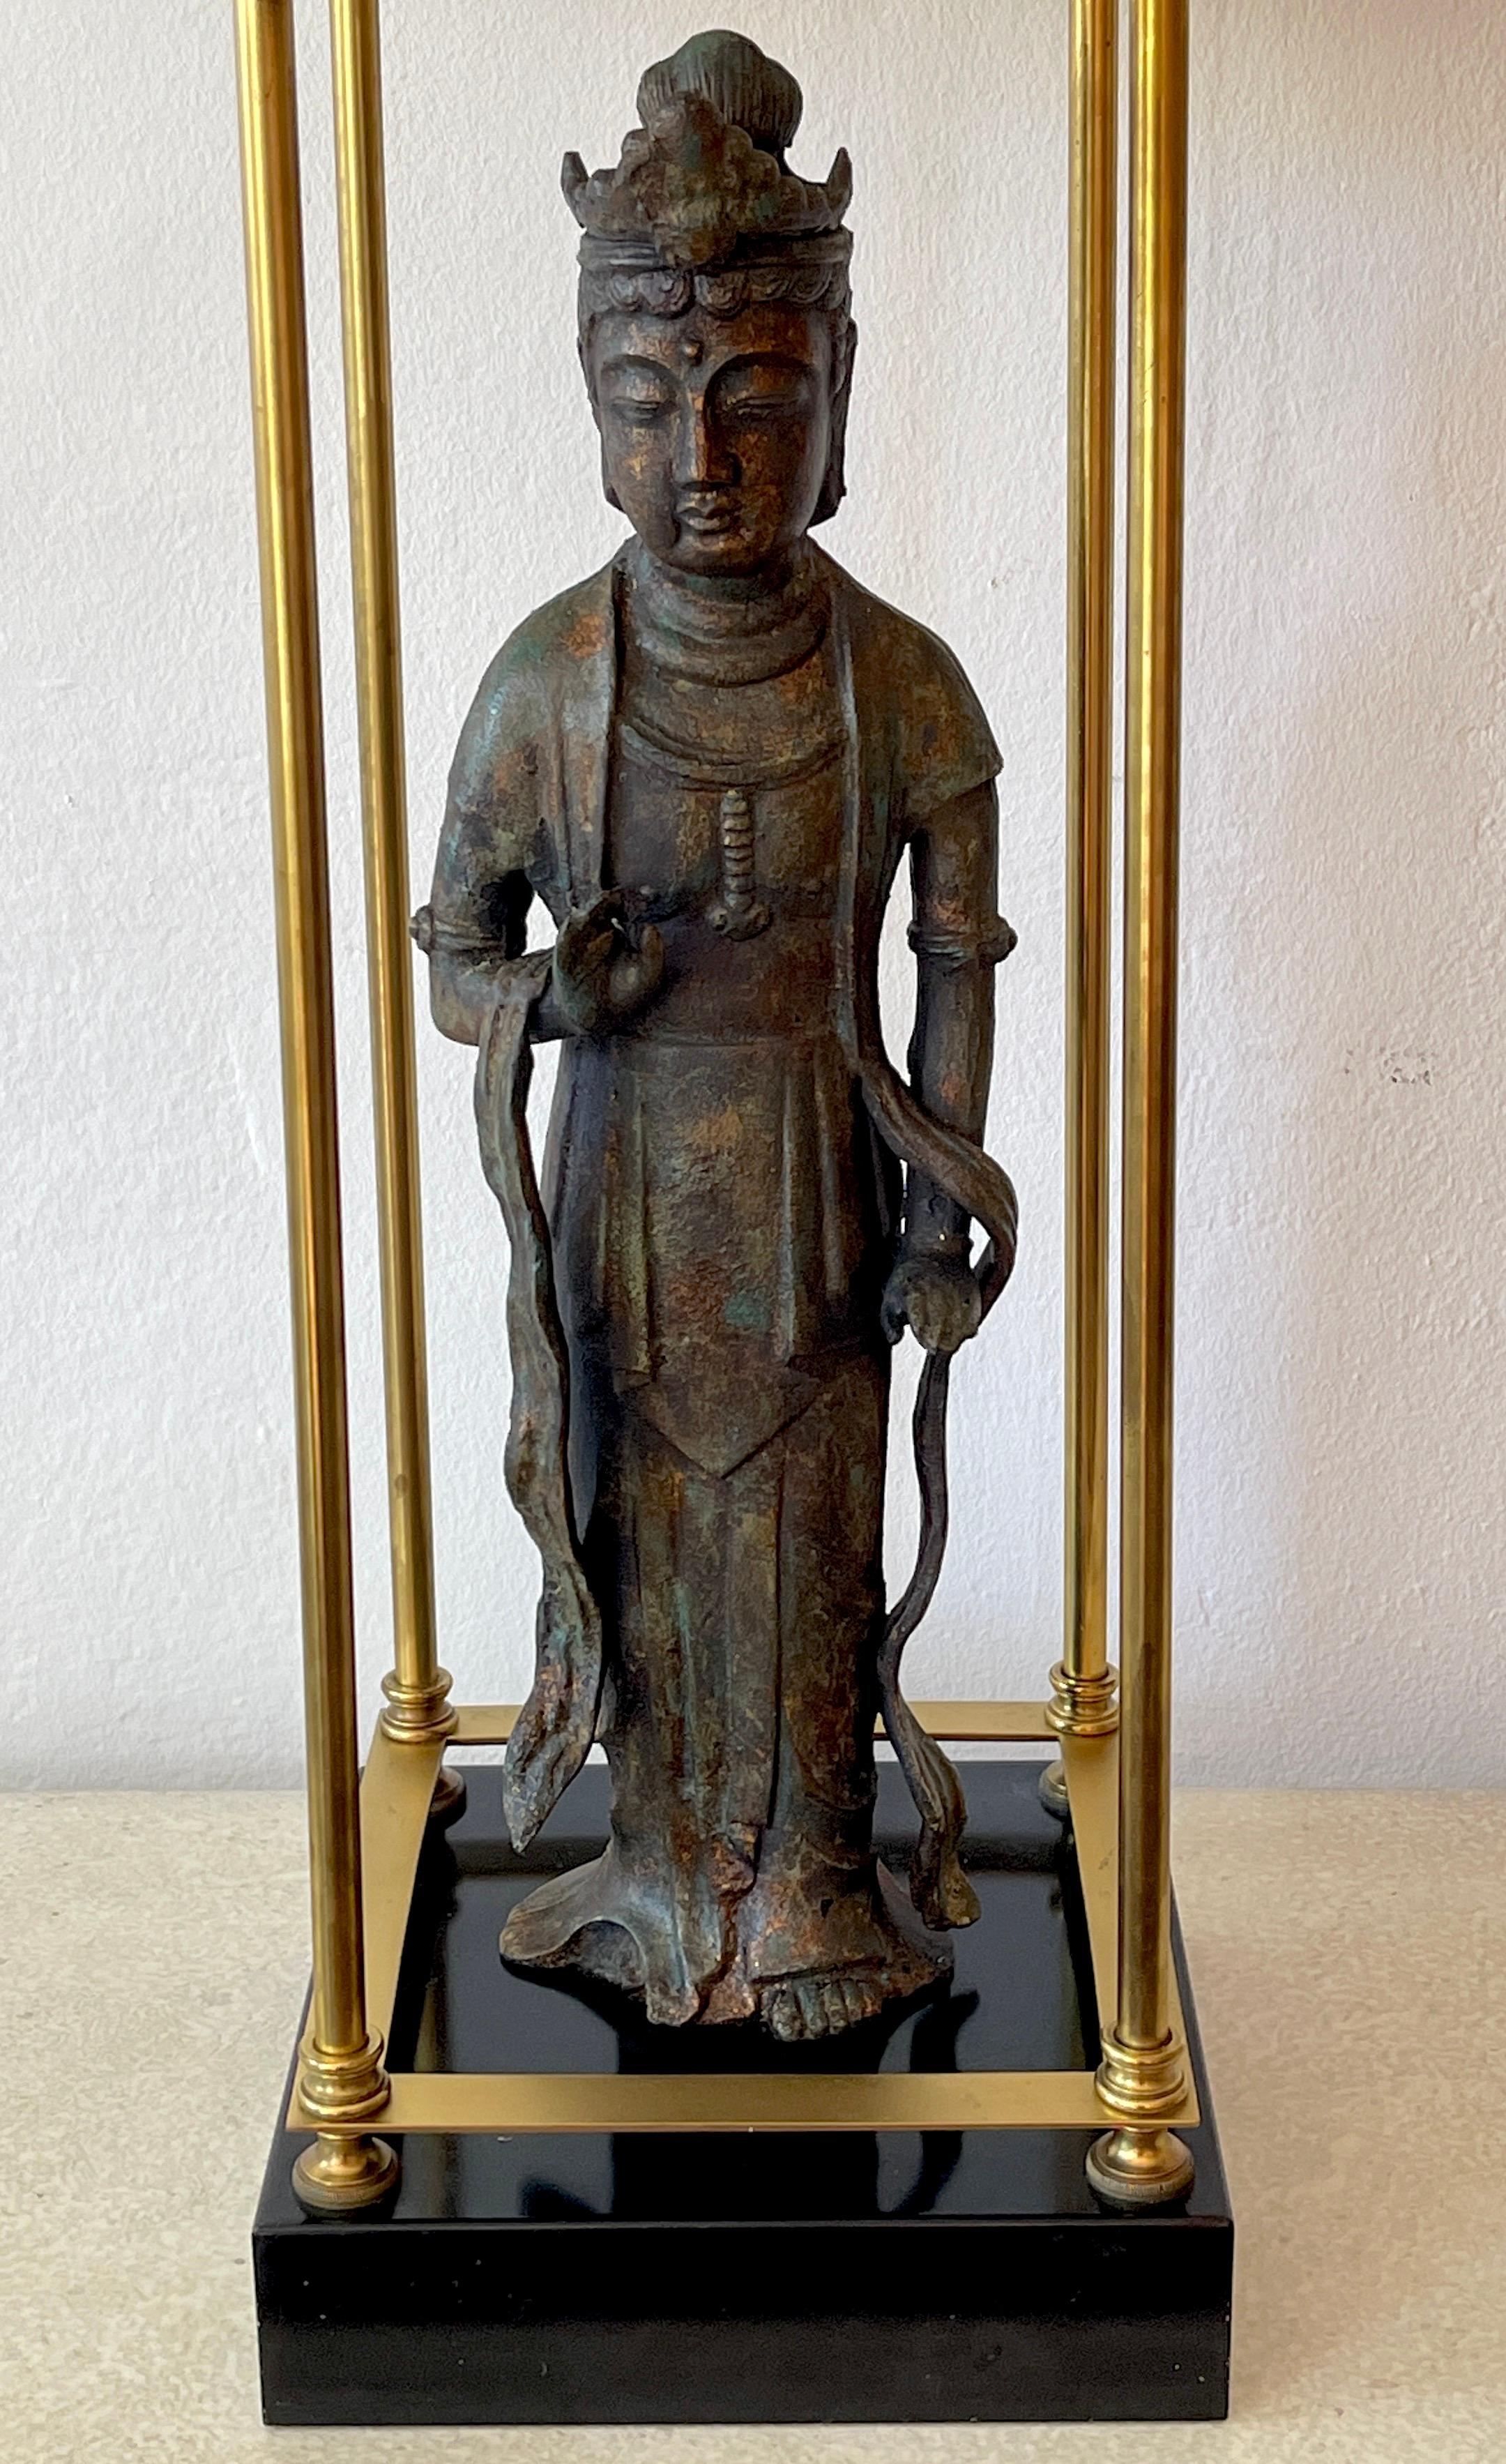 20th Century Modern Bronze Standing Figure of Guanyn Lamp, Attributed to Billy Haines